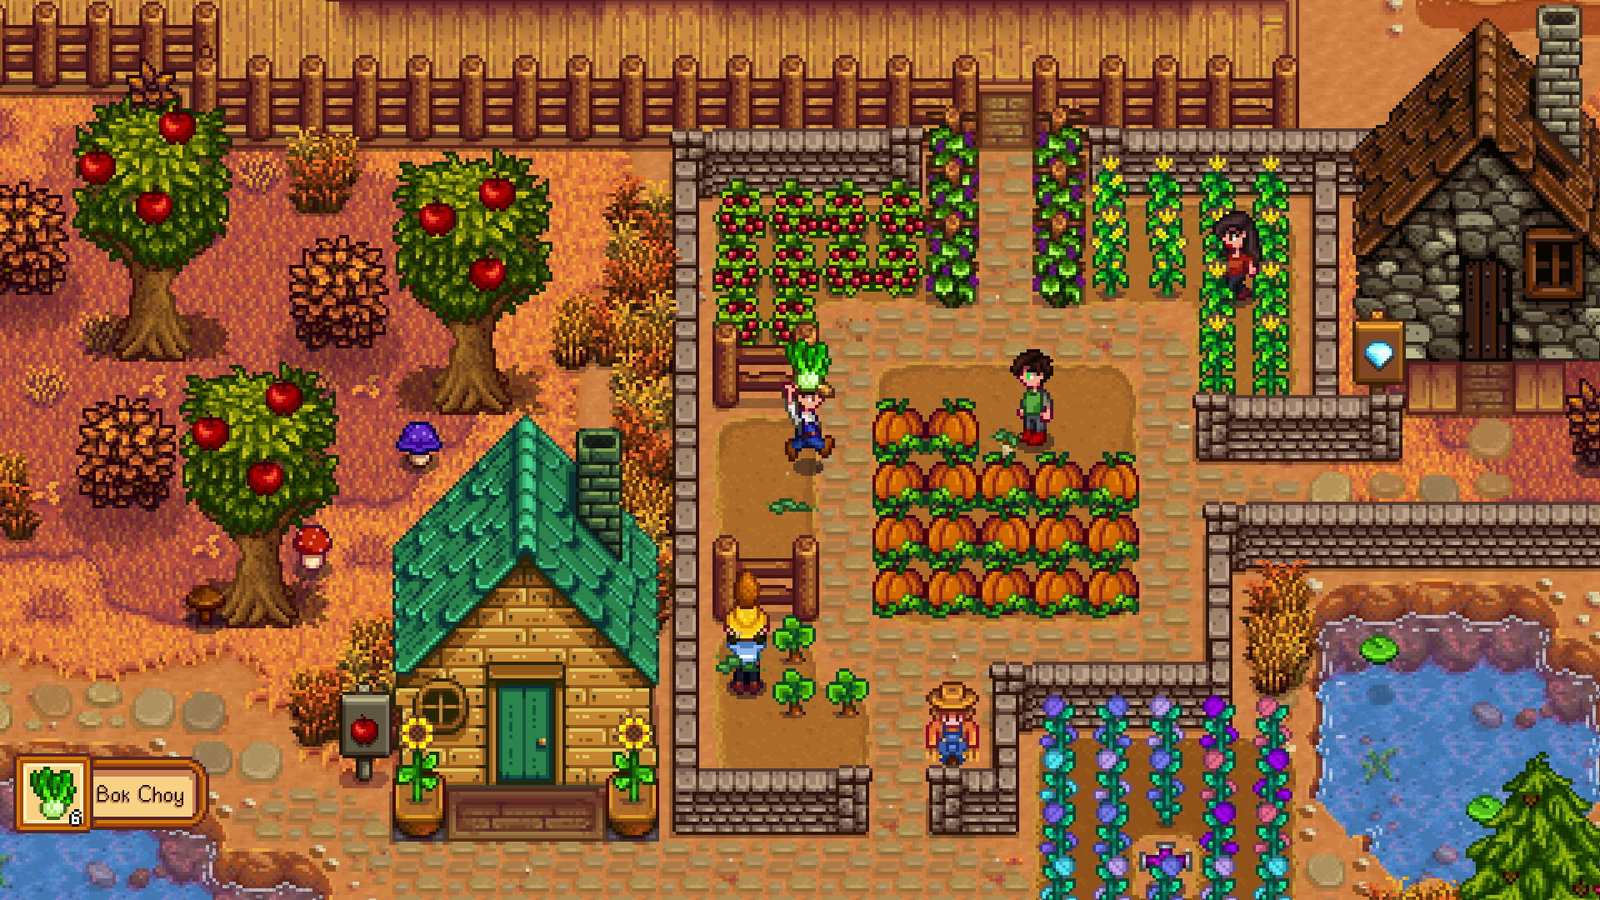 Couples Tips To Make Stardew Valley MULTIPLAYER Even BETTER! 